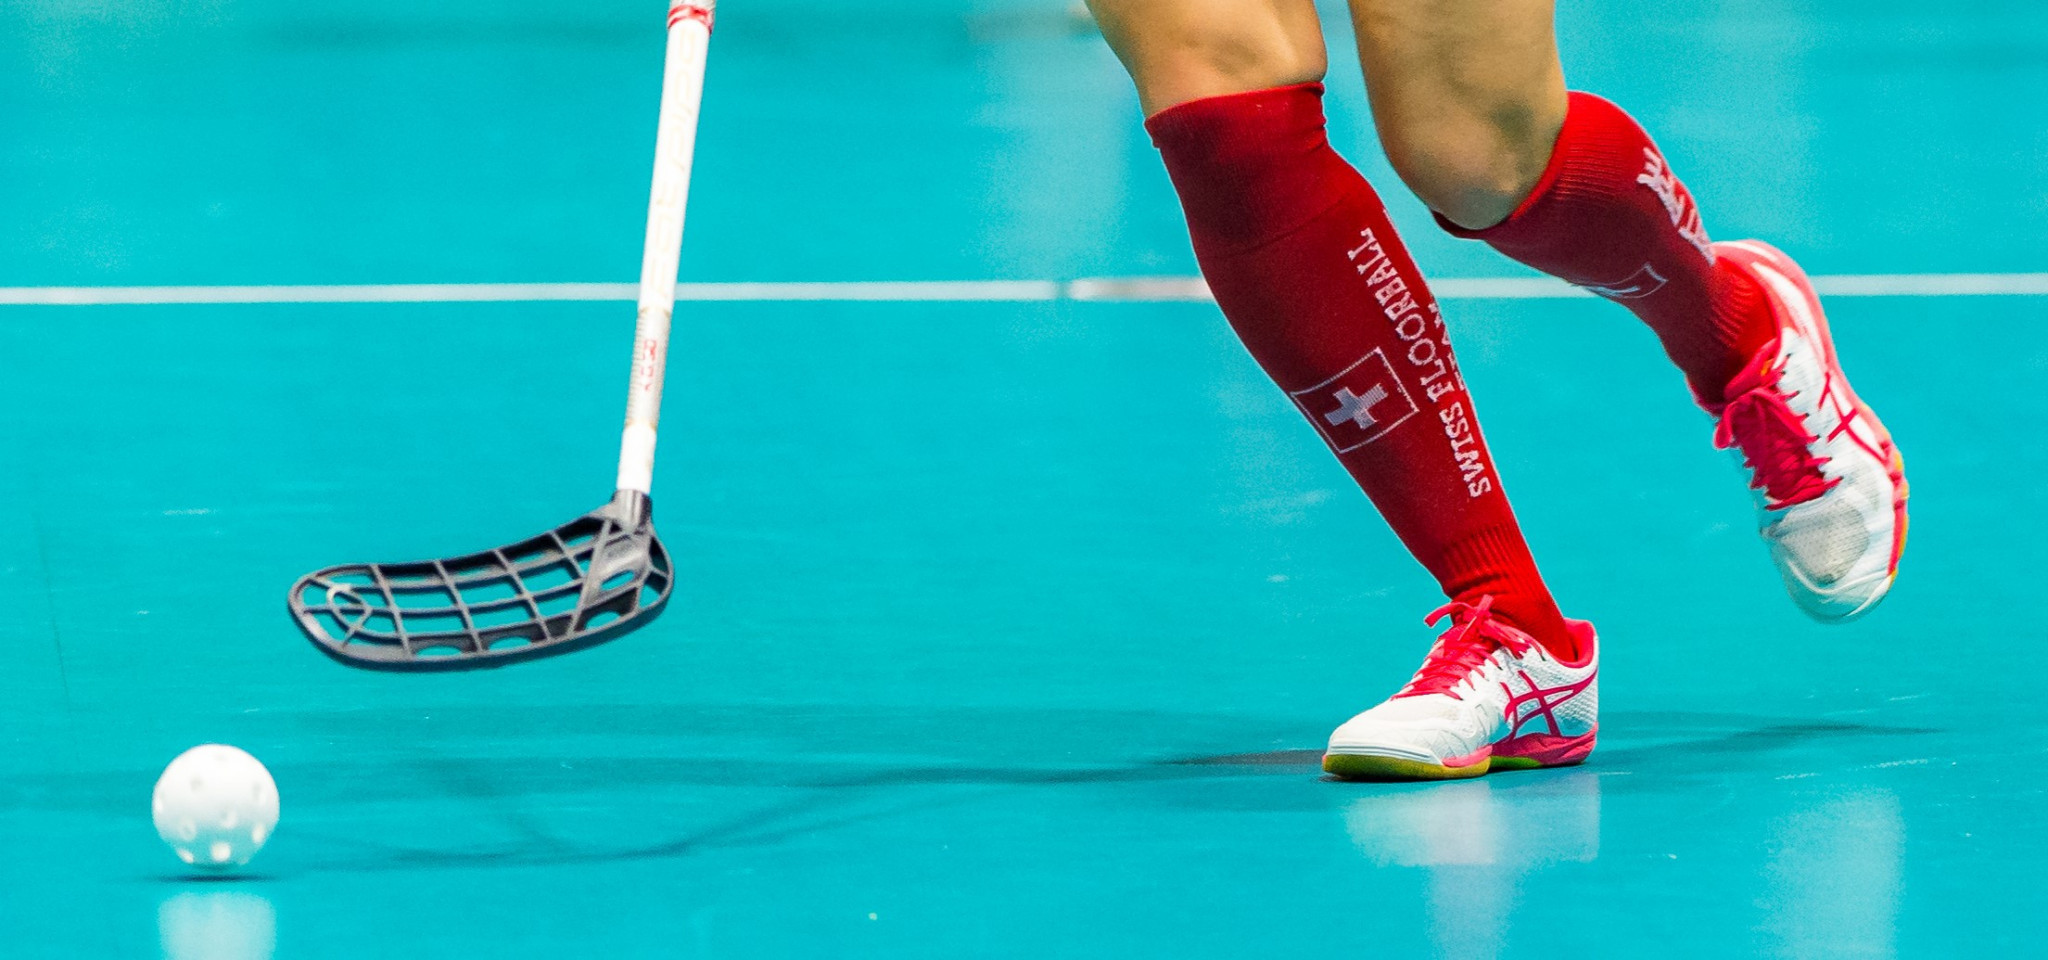 The IFF said that September is the most likely window for the Women's Under-19 World Floorball Championship ©Getty Images